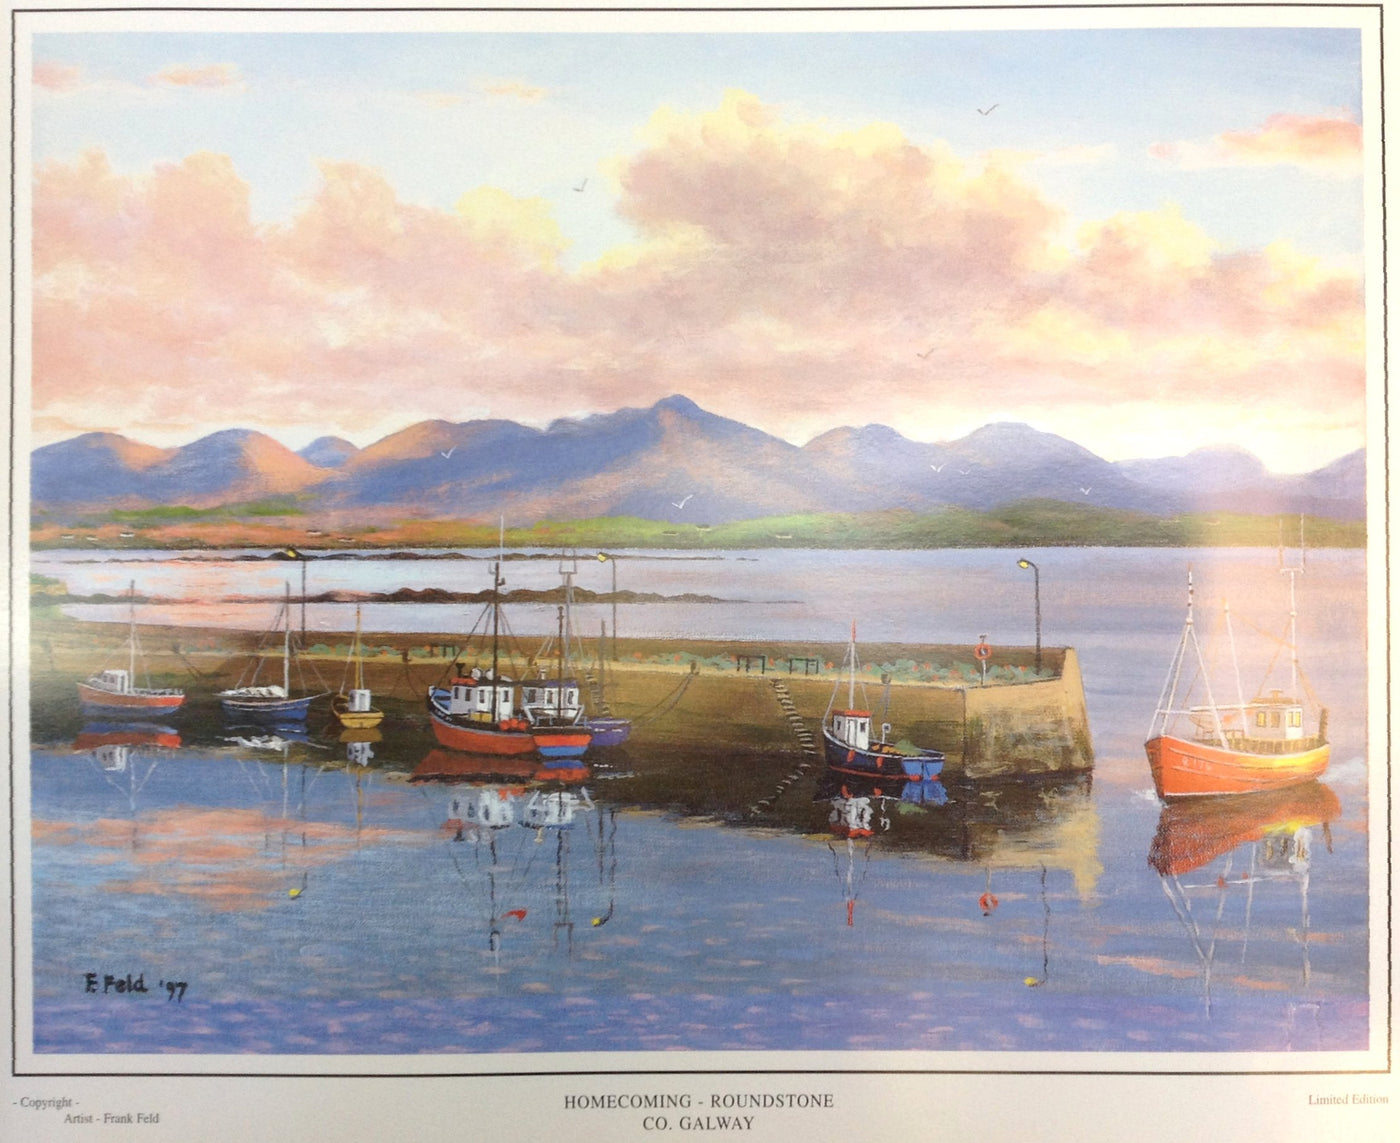 Homecoming. Roundstone Co.Galway - Green Gallery